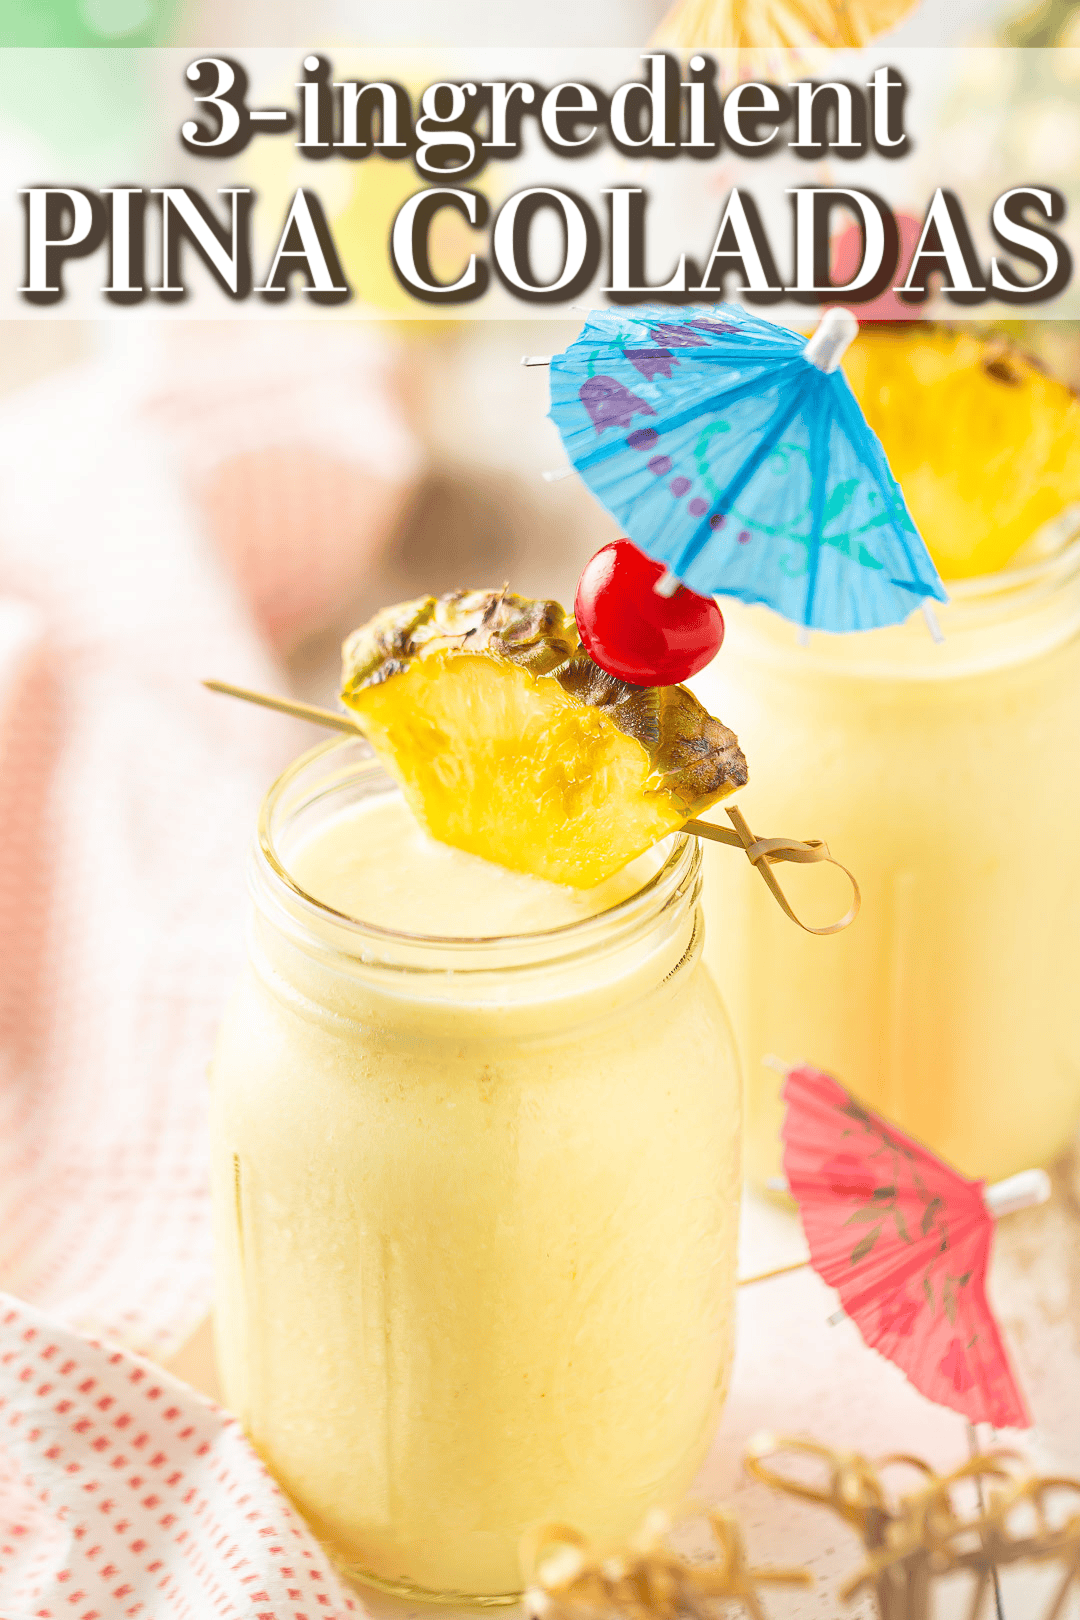 Pina colada recipe blended and garnished with fresh pineapple and maraschino cherries.